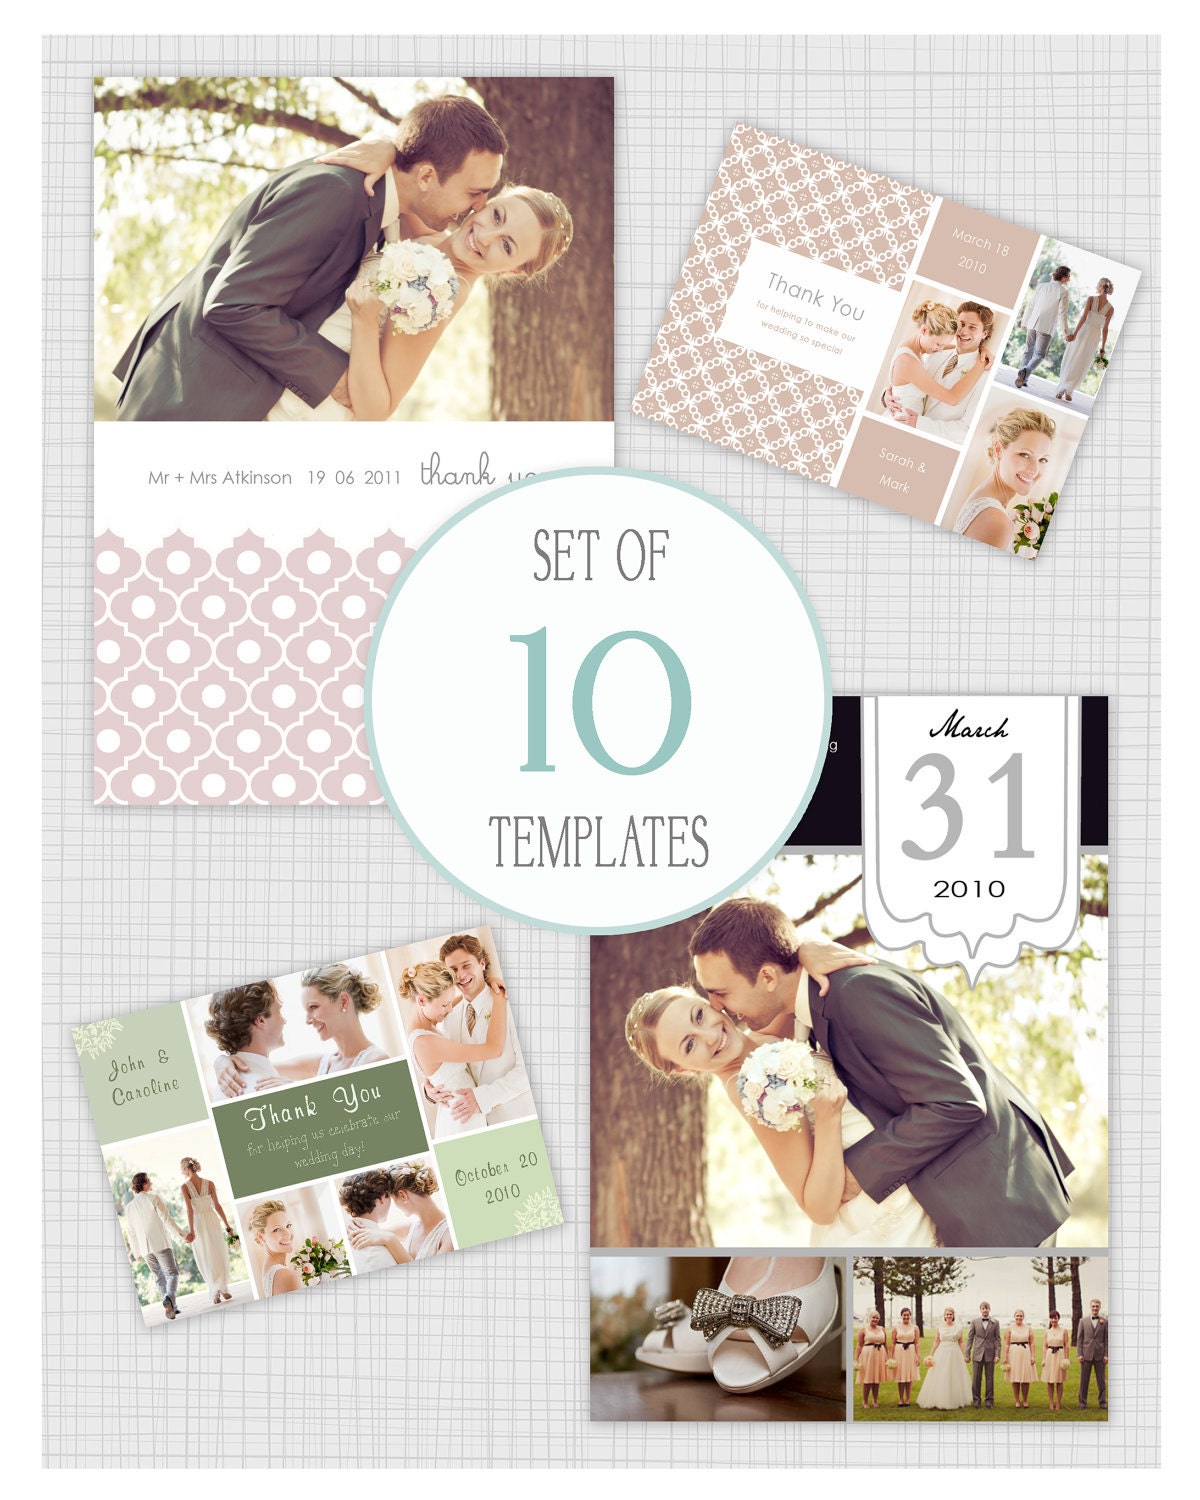 Free Thank You Templates For Wedding